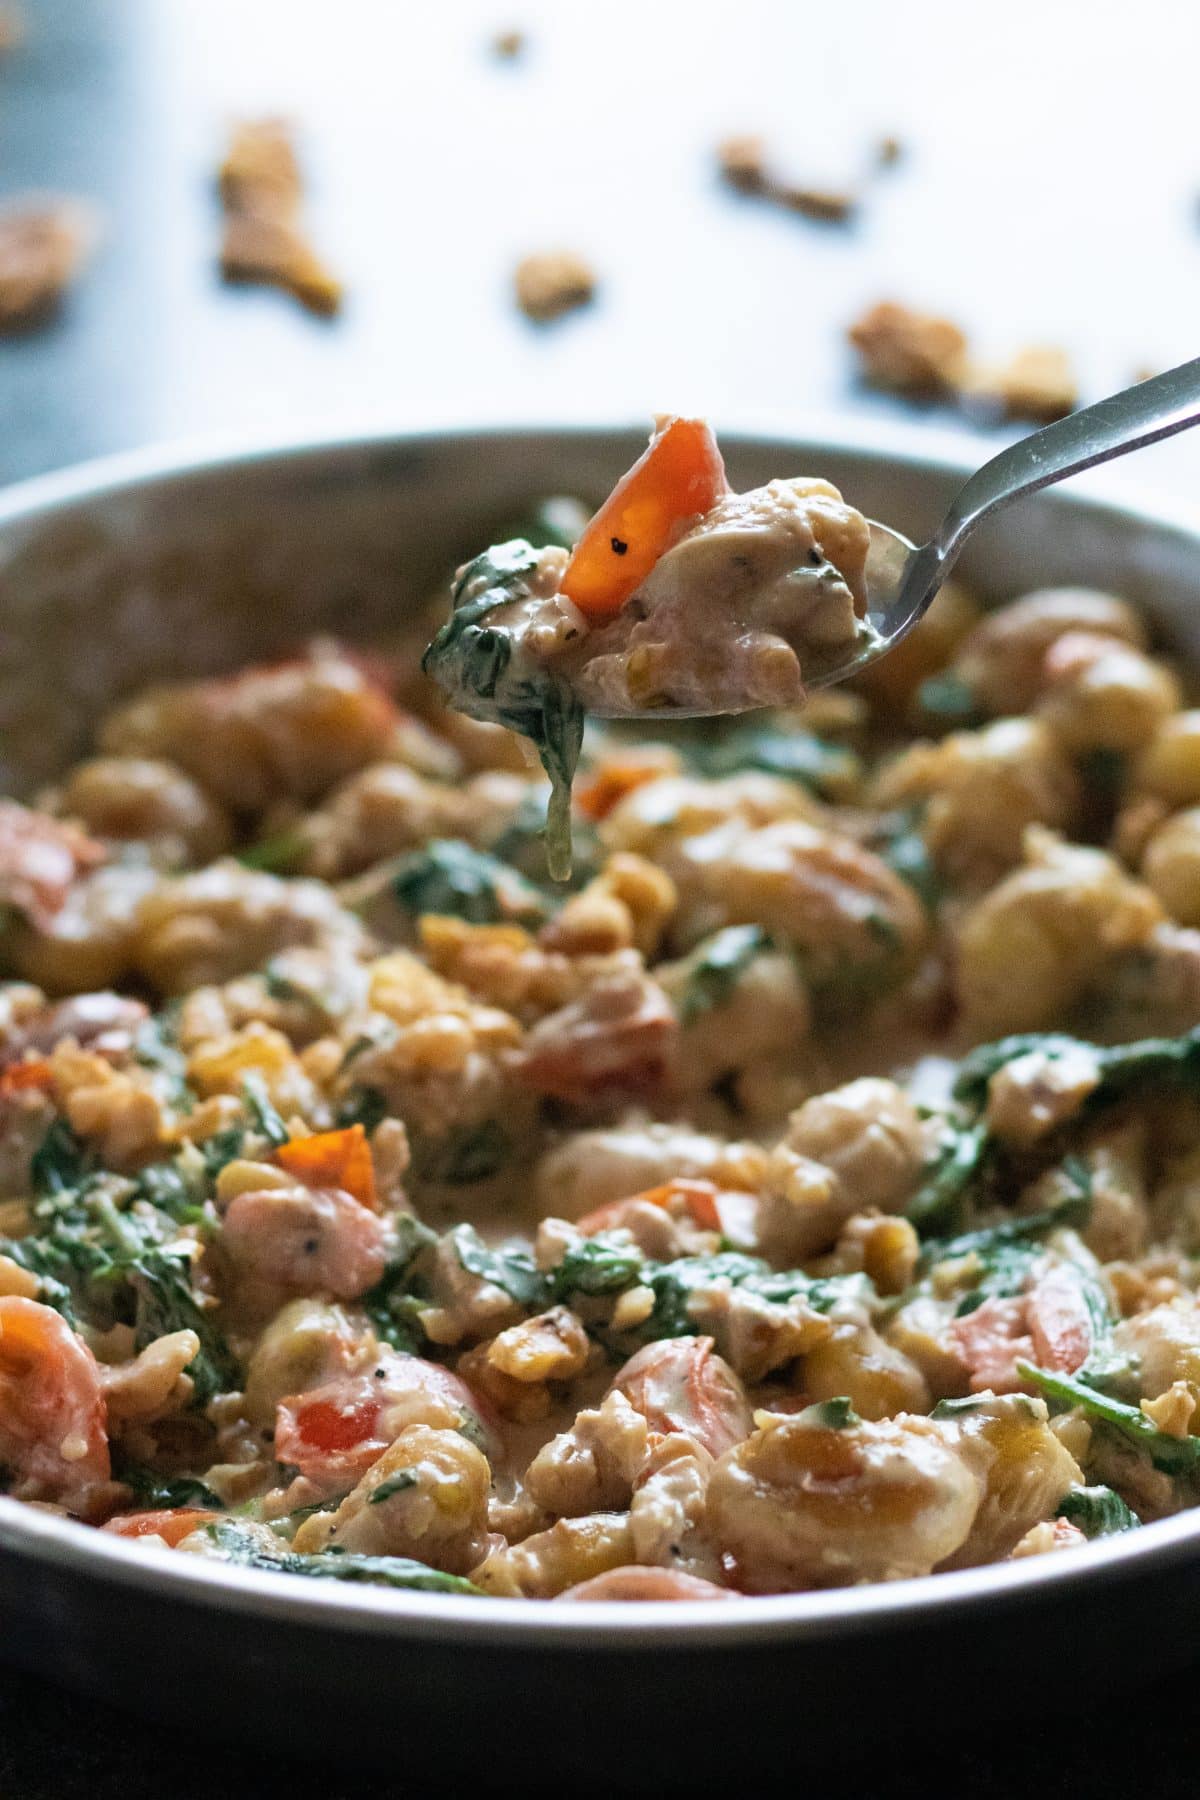 a spoonful of creamy gnocchi with gorgonzola picked up from a pan full of it